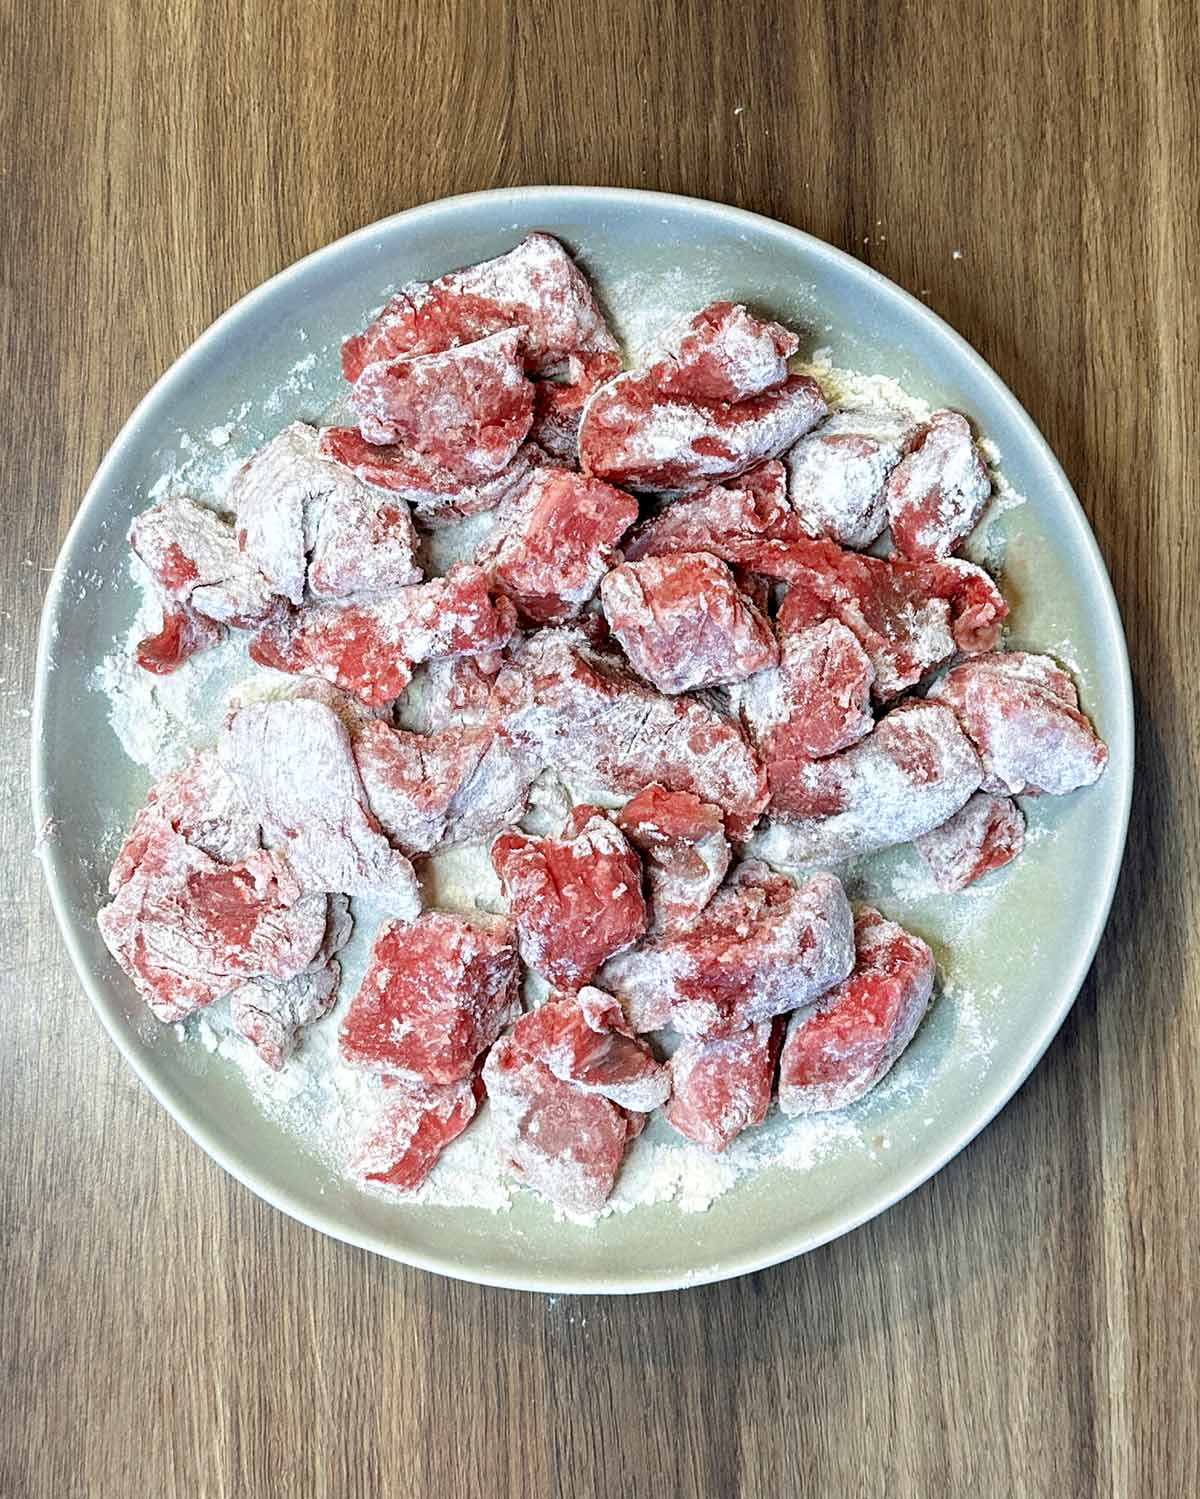 A plate of beef chunks coated in flour.